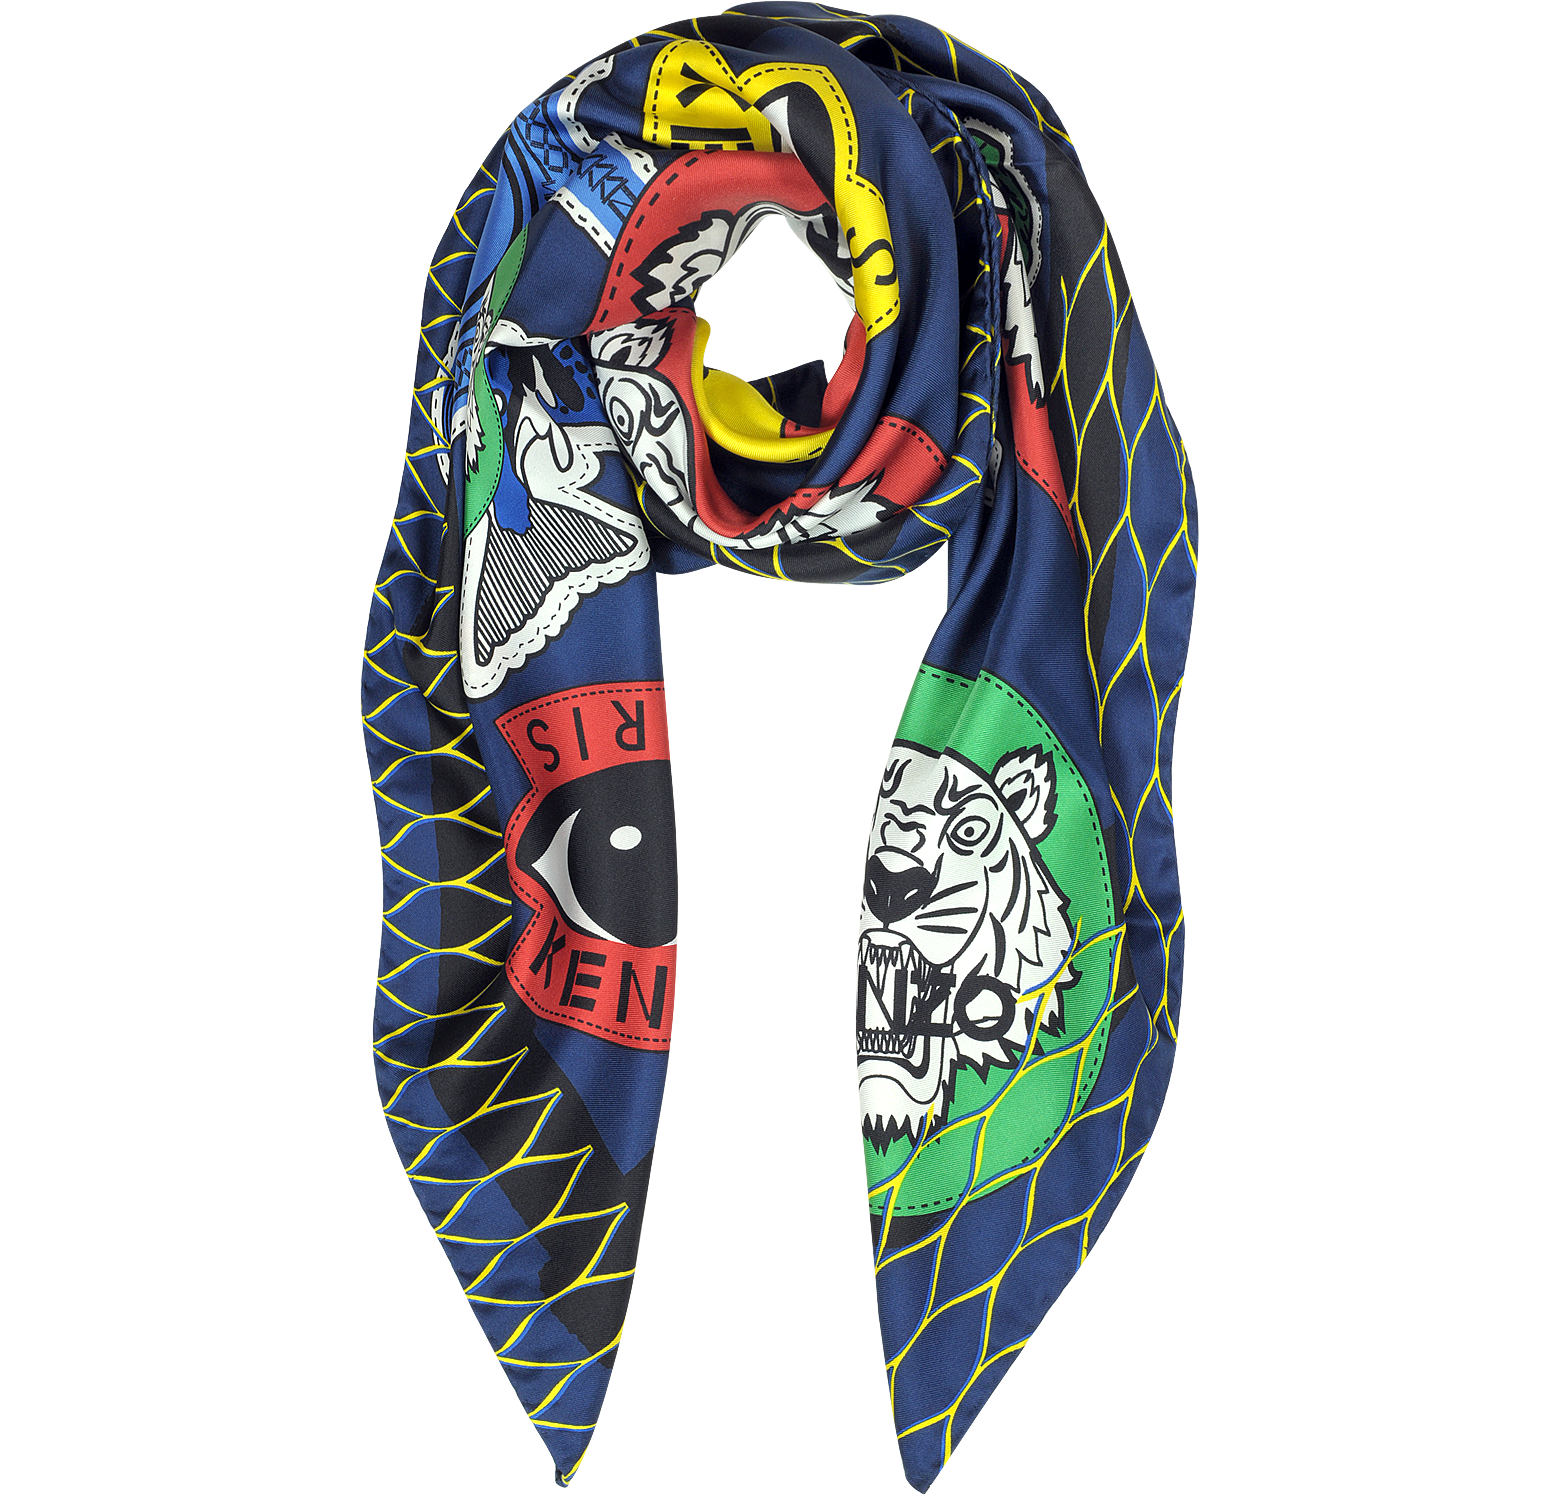 Kenzo Navy Blue Badges Tiger Print Silk Square Scarves at FORZIERI